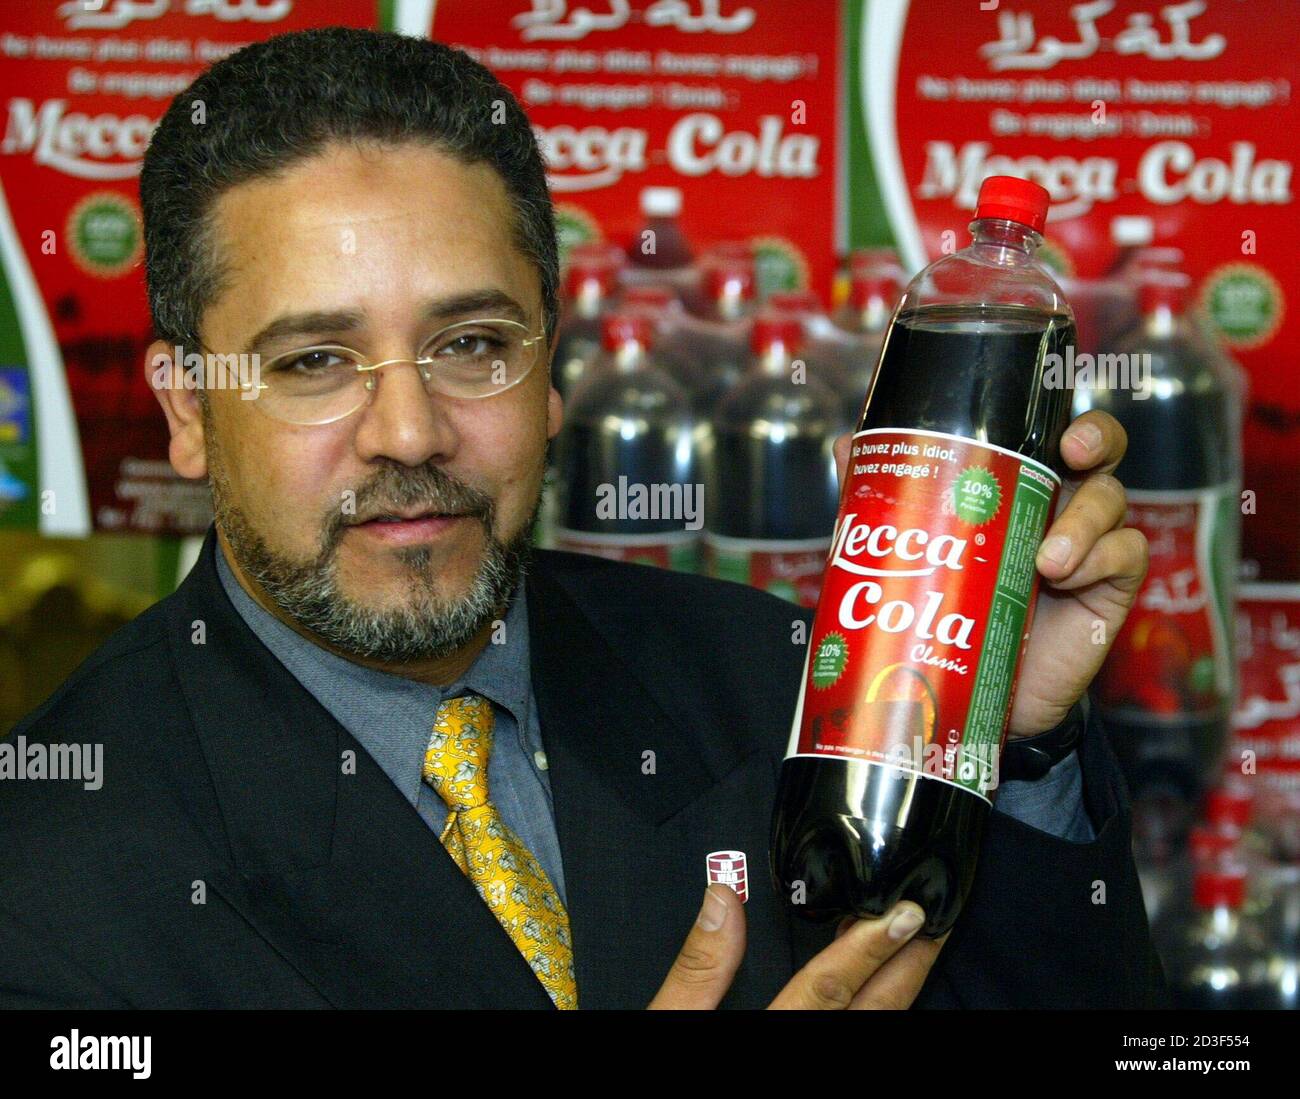 Businessman Tawfiq Mathlouthi holds a 1.5 litre bottle of his new soft  drink named Mecca Cola in offices at Saint Denis, near Paris on November 8,  2002. Mathlouthi, a director of Radio